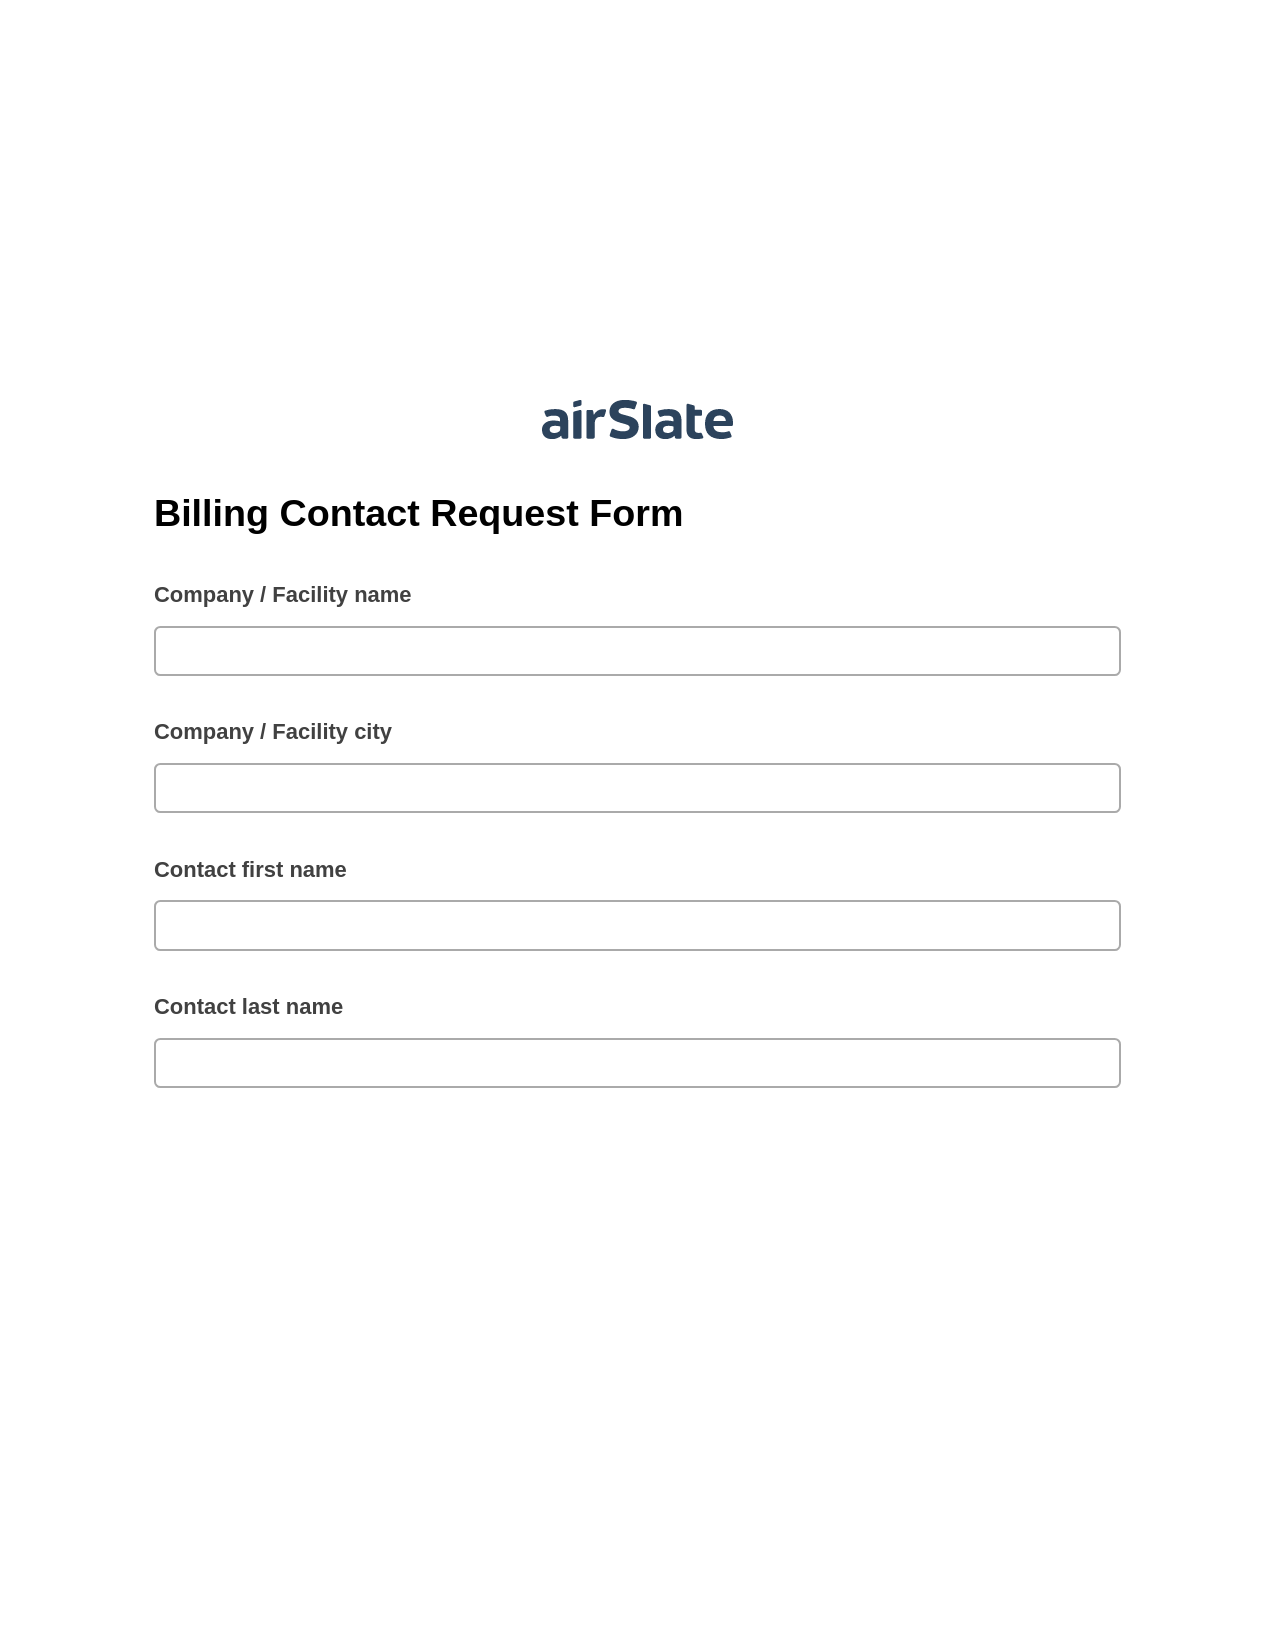 Billing Contact Request Form Pre-fill Dropdowns from CSV File Bot, Create NetSuite Records Bot, Export to Excel 365 Bot